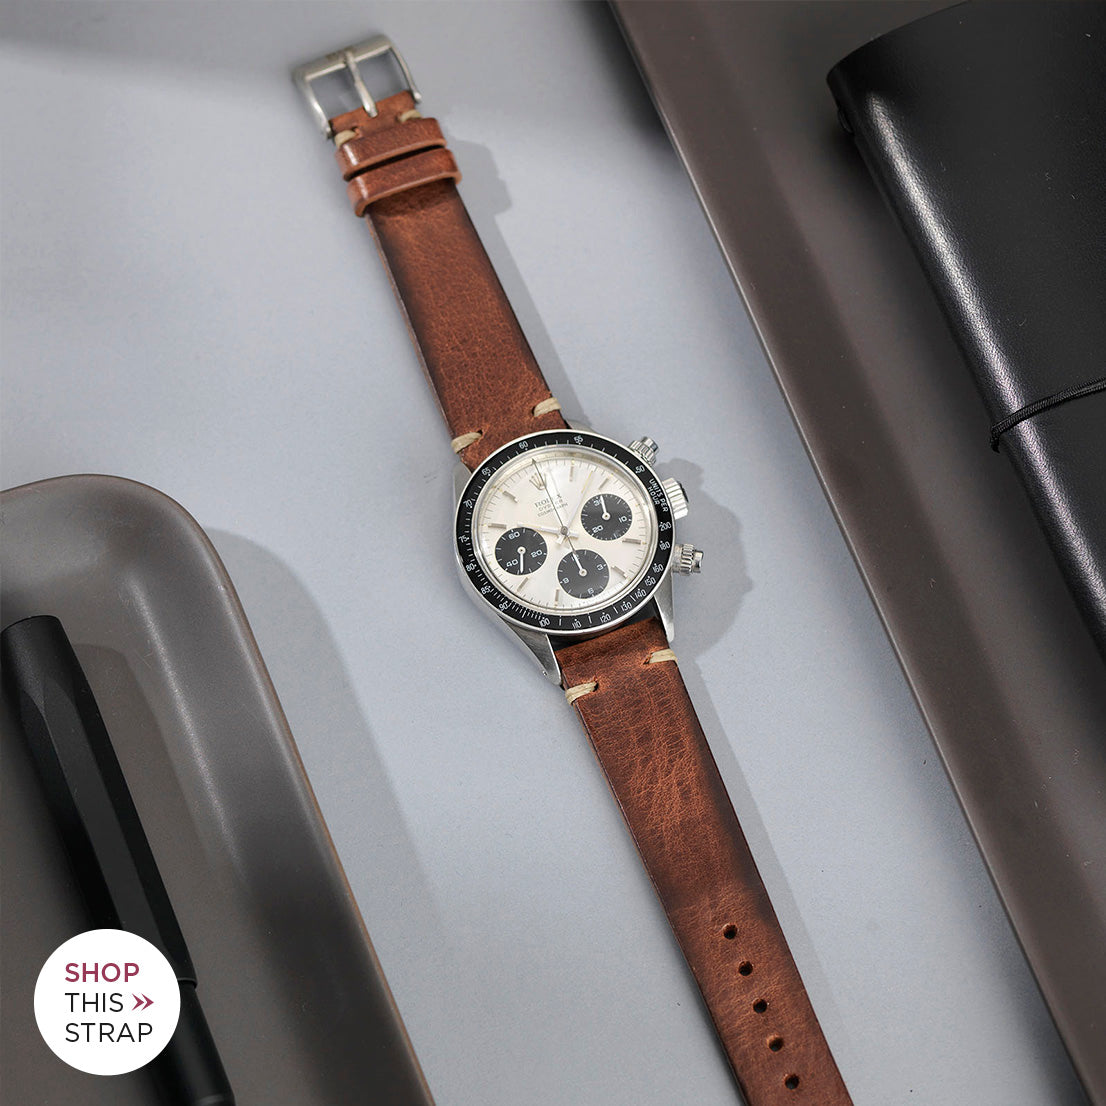 Bulang and Sons_Strap Guide_The Rolex Daytona 6263_Siena Brown Leather Watch Strap